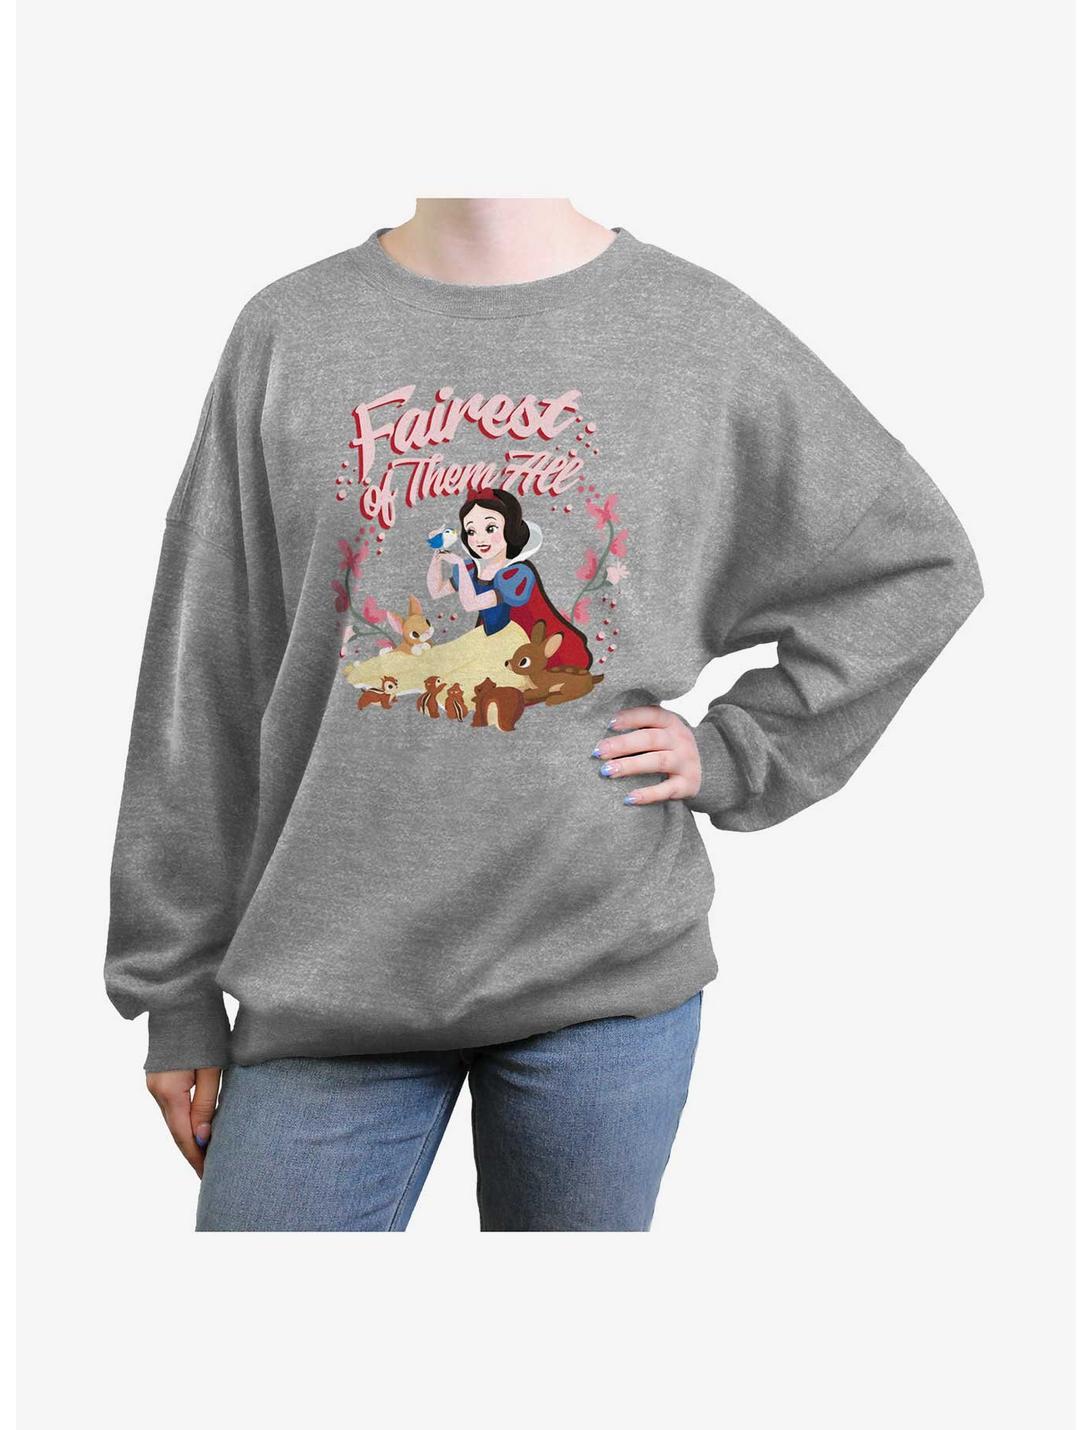 Disney Snow White and the Seven Dwarfs Fairest Of Them All Womens Oversized Sweatshirt, HEATHER GR, hi-res